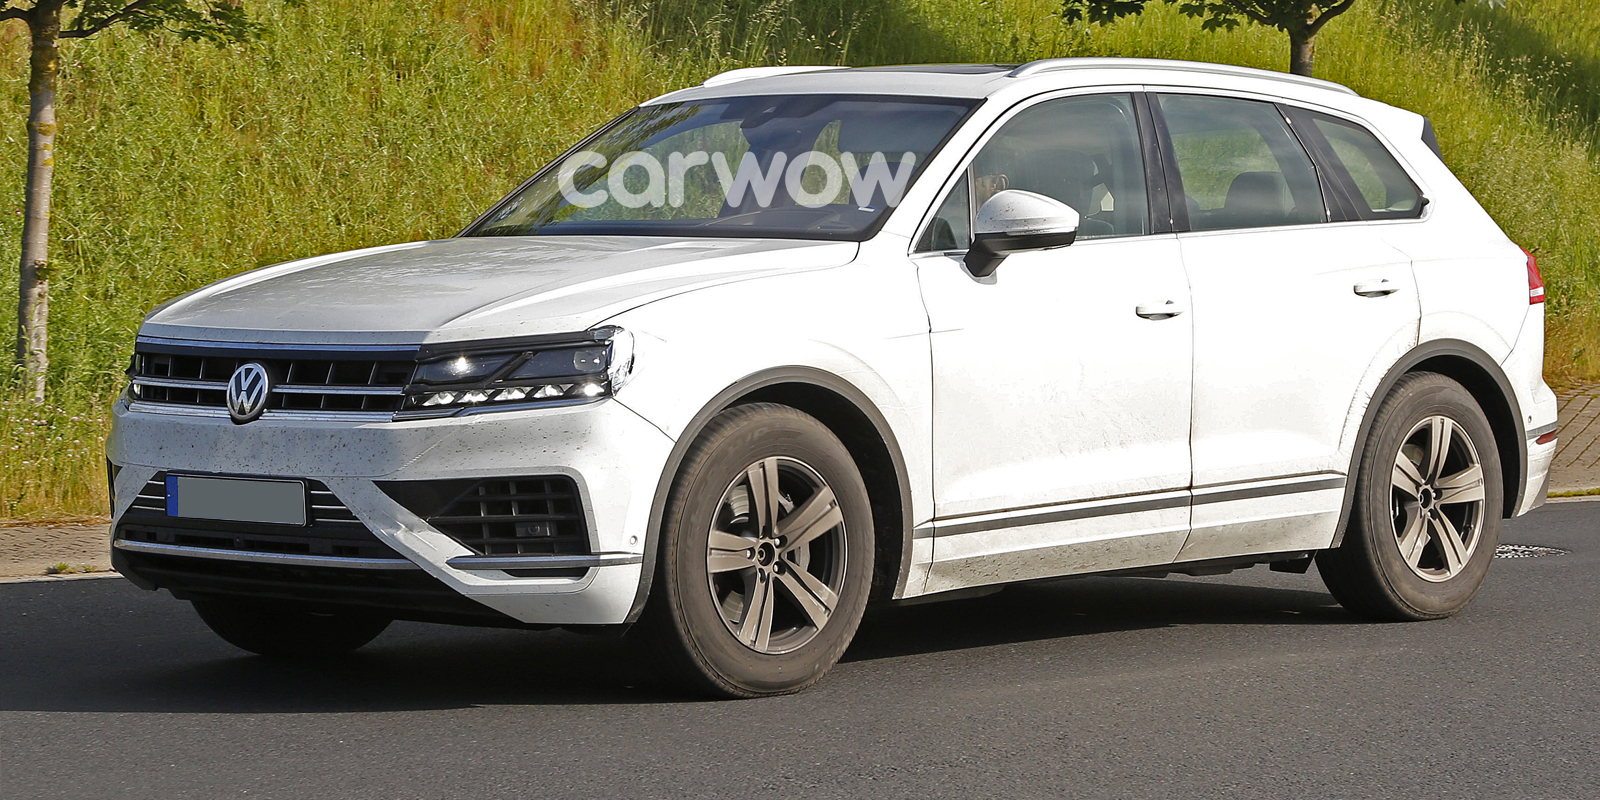 VW Touareg 4x4 SUV price specs release date  carwow